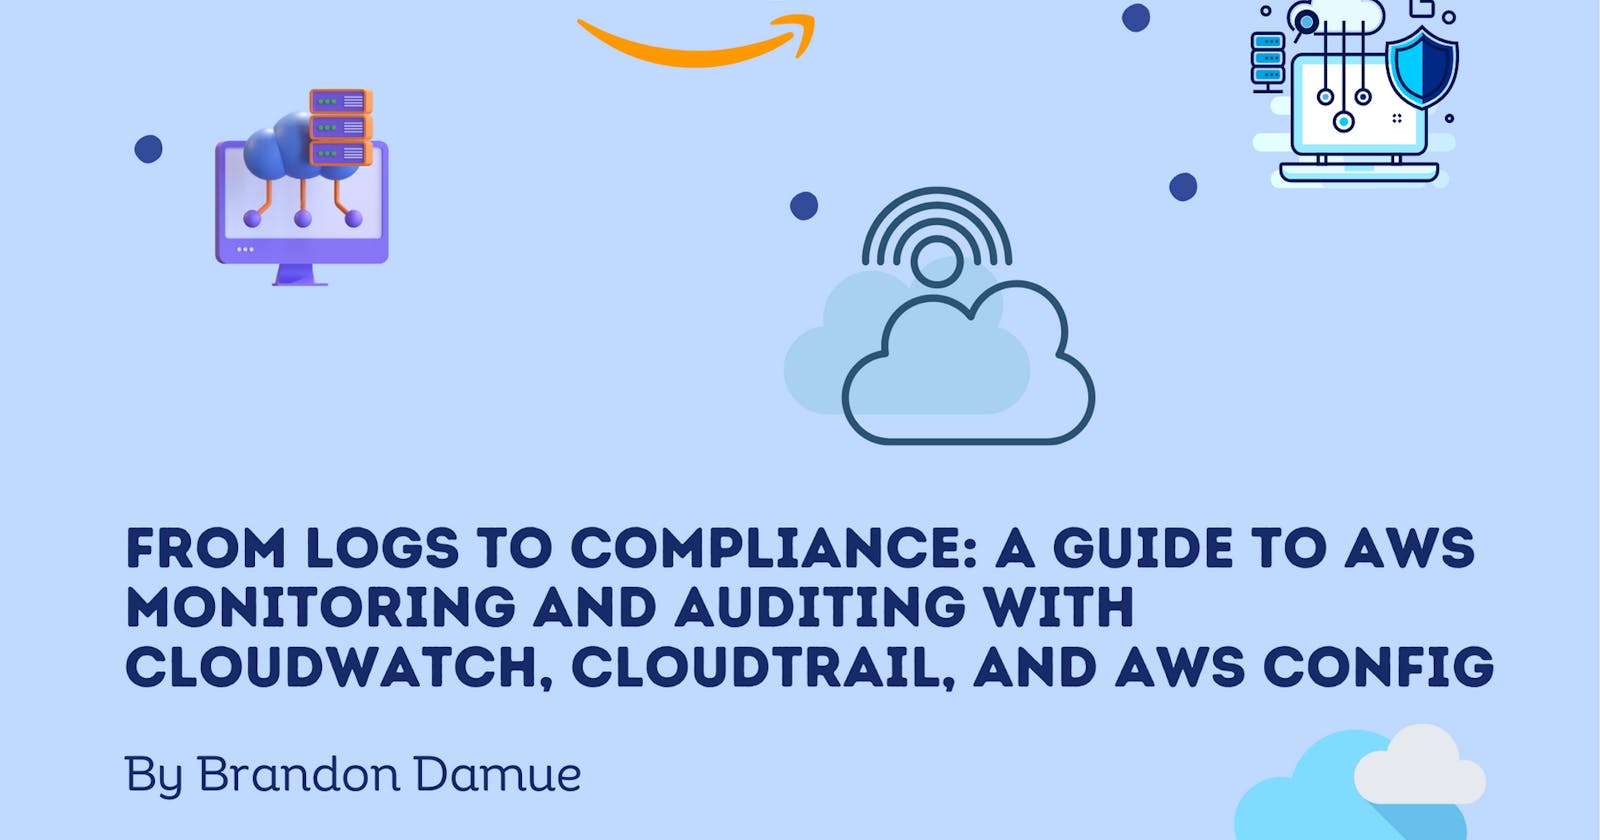 From Logs to Compliance: A Guide to AWS Monitoring and auditing with CloudWatch, CloudTrail, and AWS Config